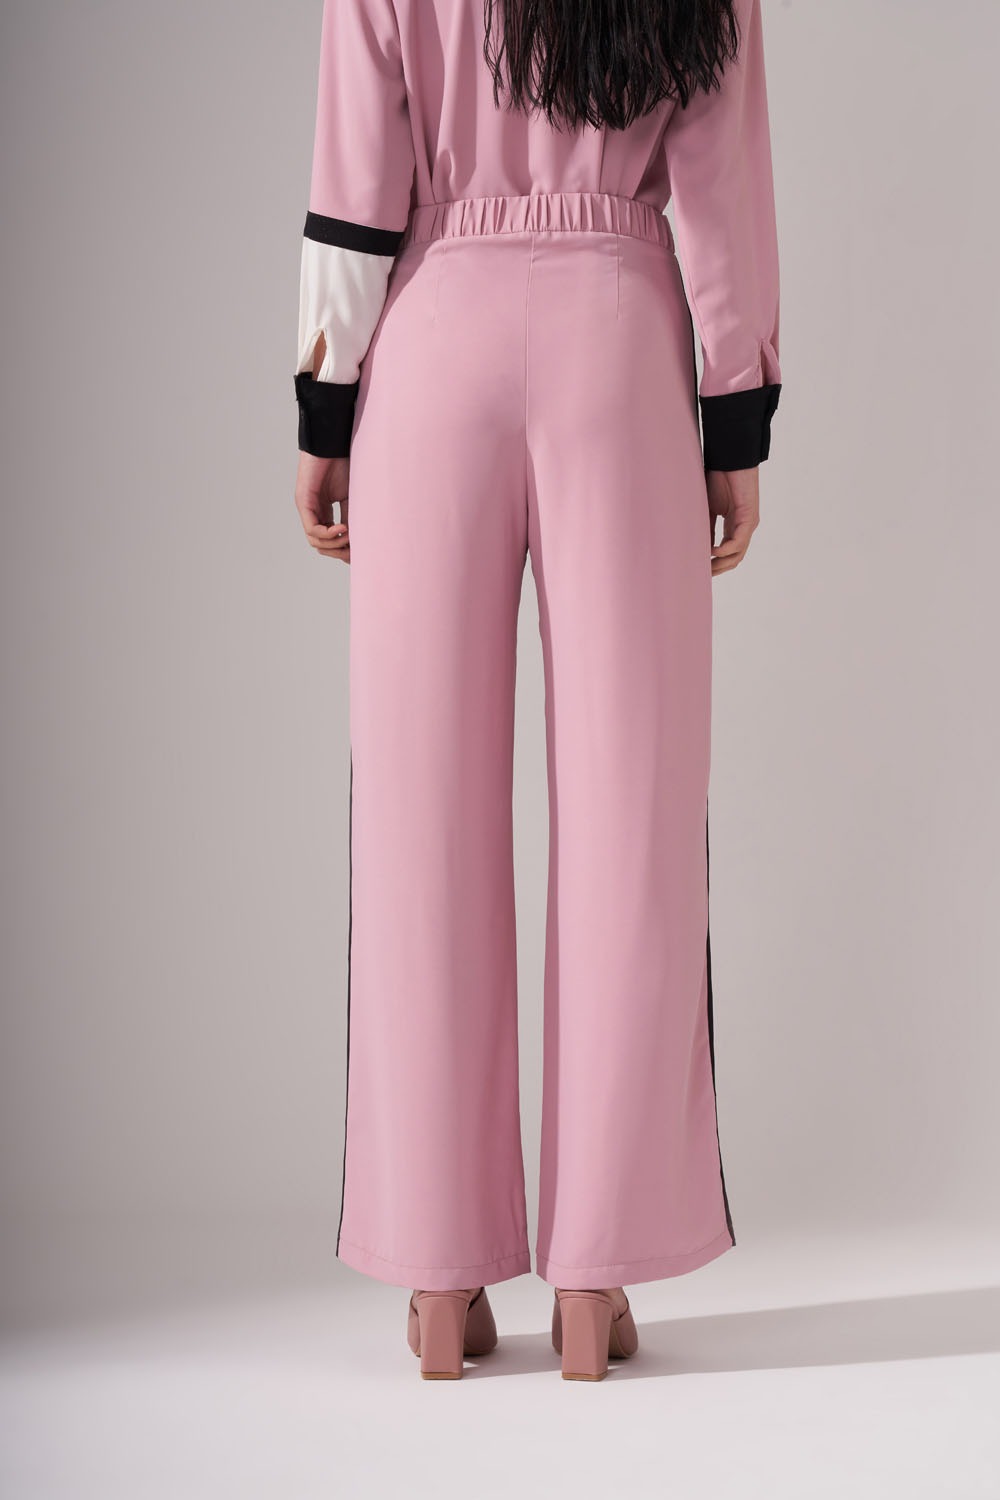 Silvery Banded Trousers (Dusty Rose)